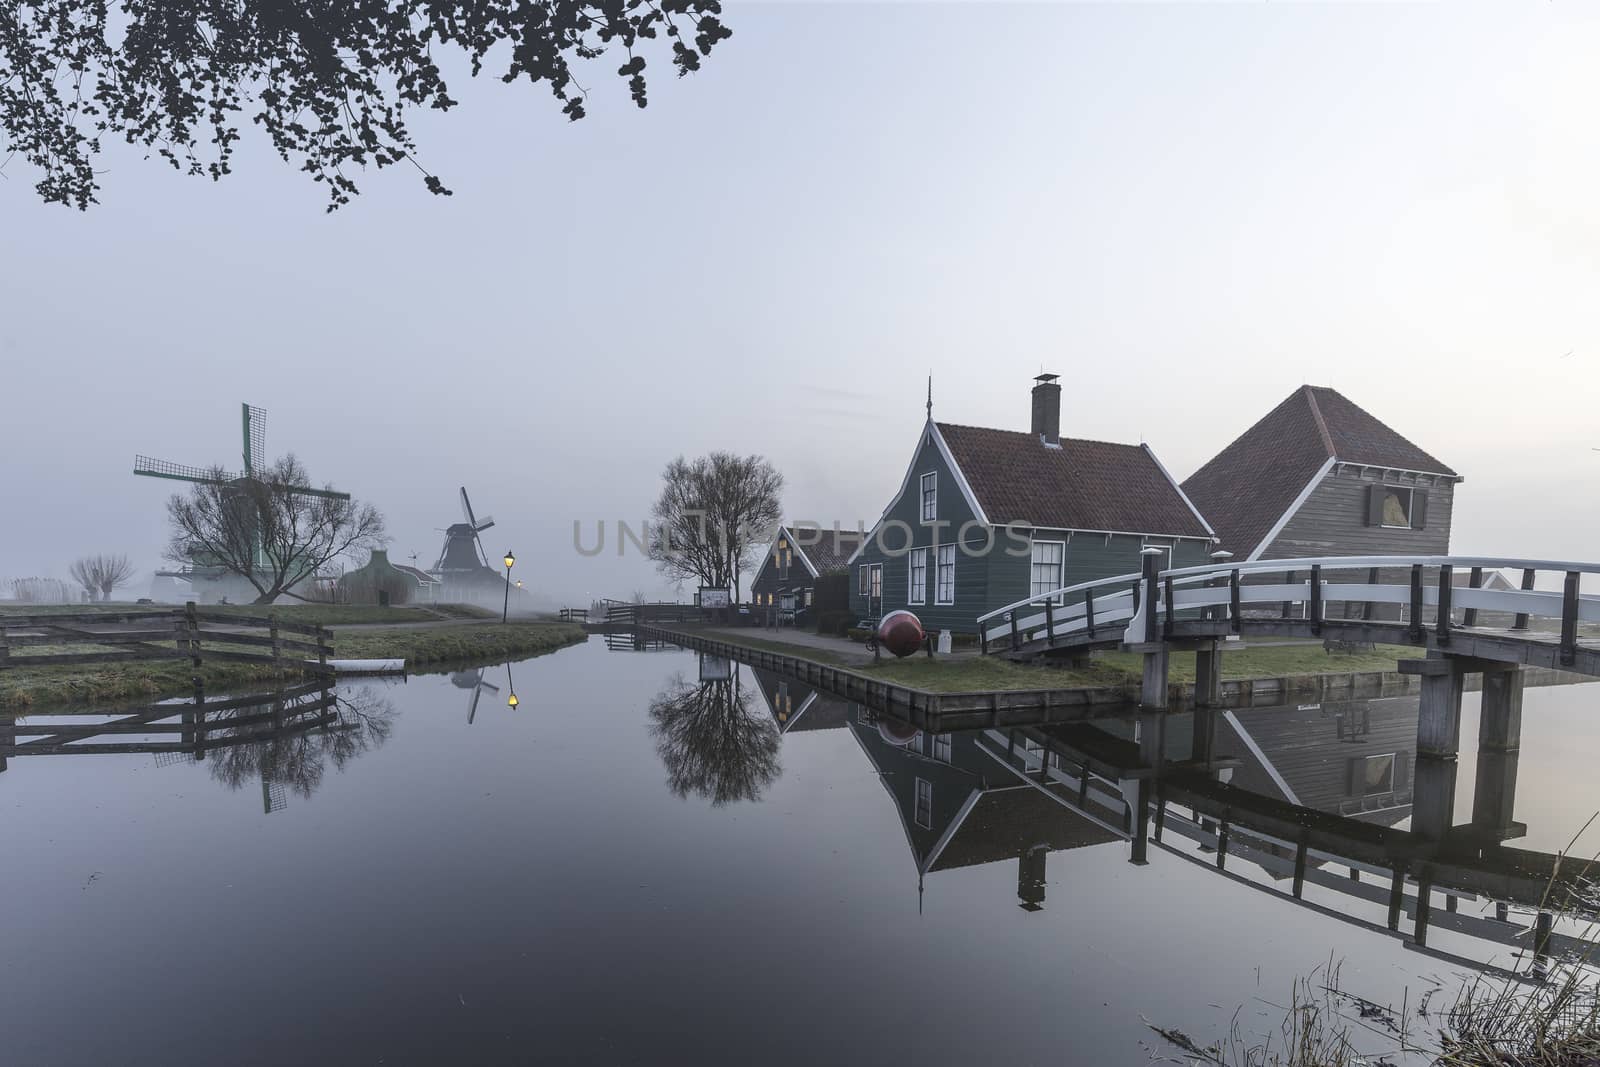 Beautiful typical Dutch wooden houses architecture mirrored on the calm canal of Zaanse Schans located at the North of Amsterdam, Netherlands